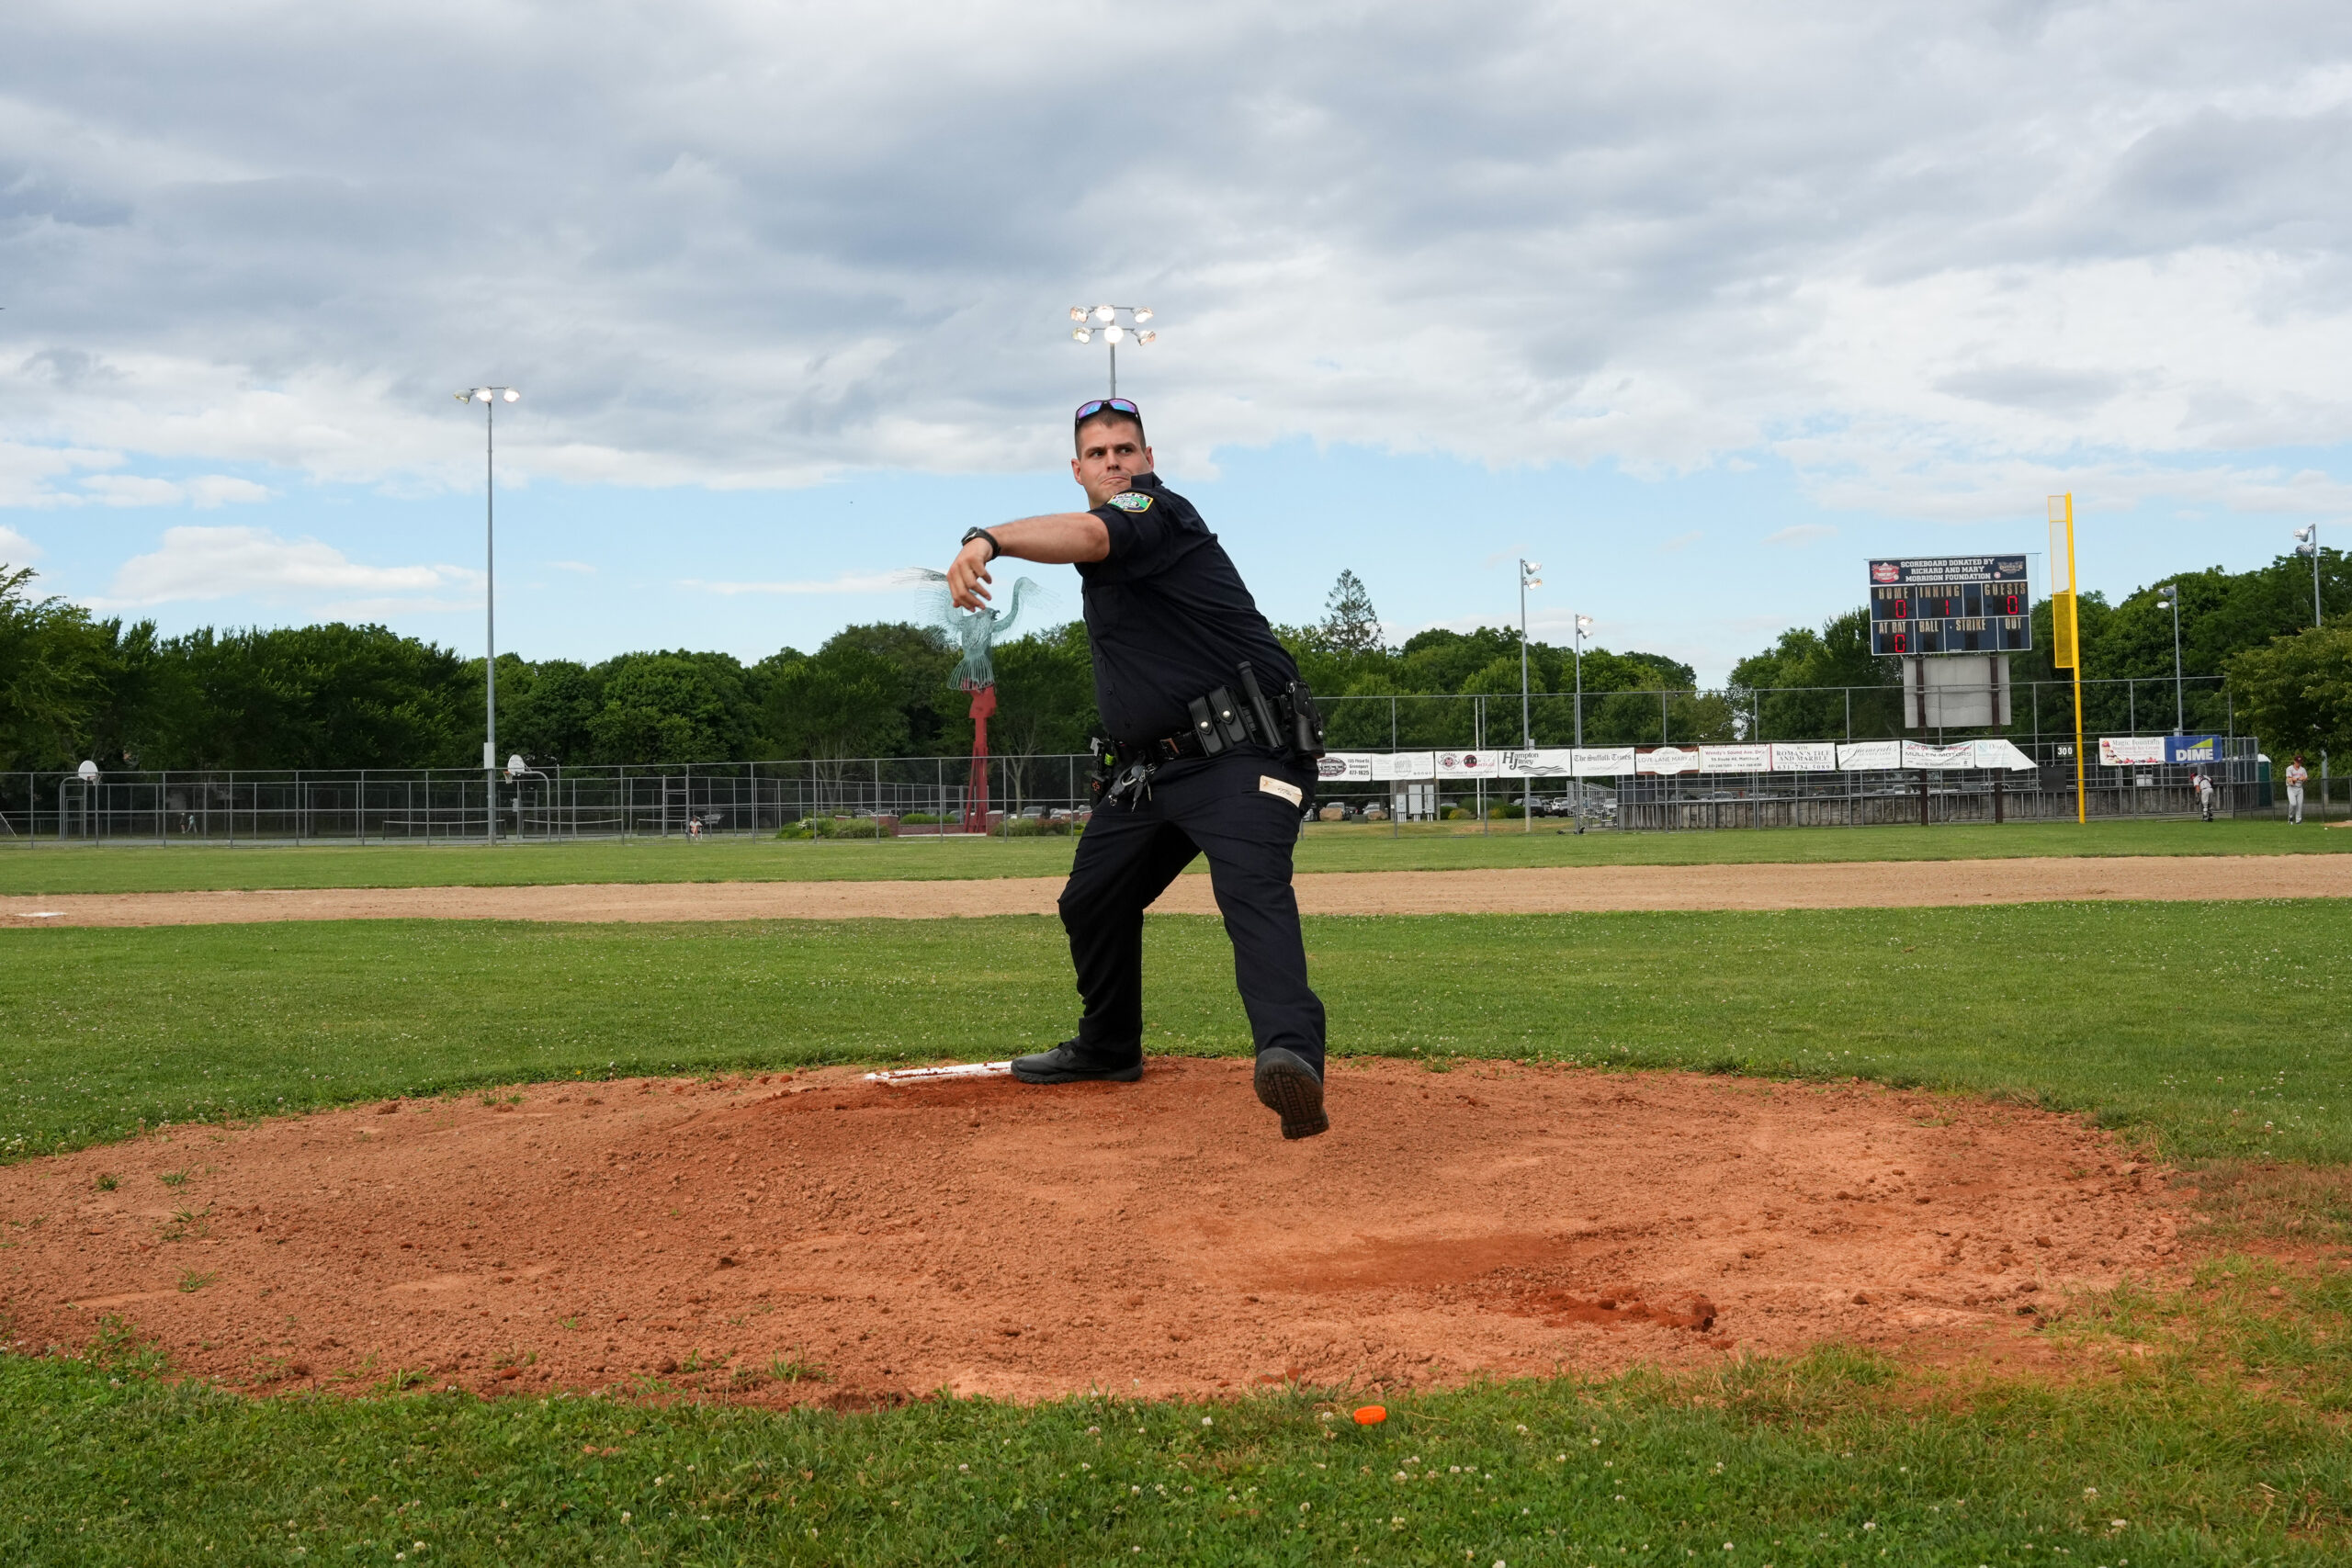 Former Riverhead Tomcat and current police officer Jimmy Luppens threw out the first pitch in uniform.   RON ESPOSITO